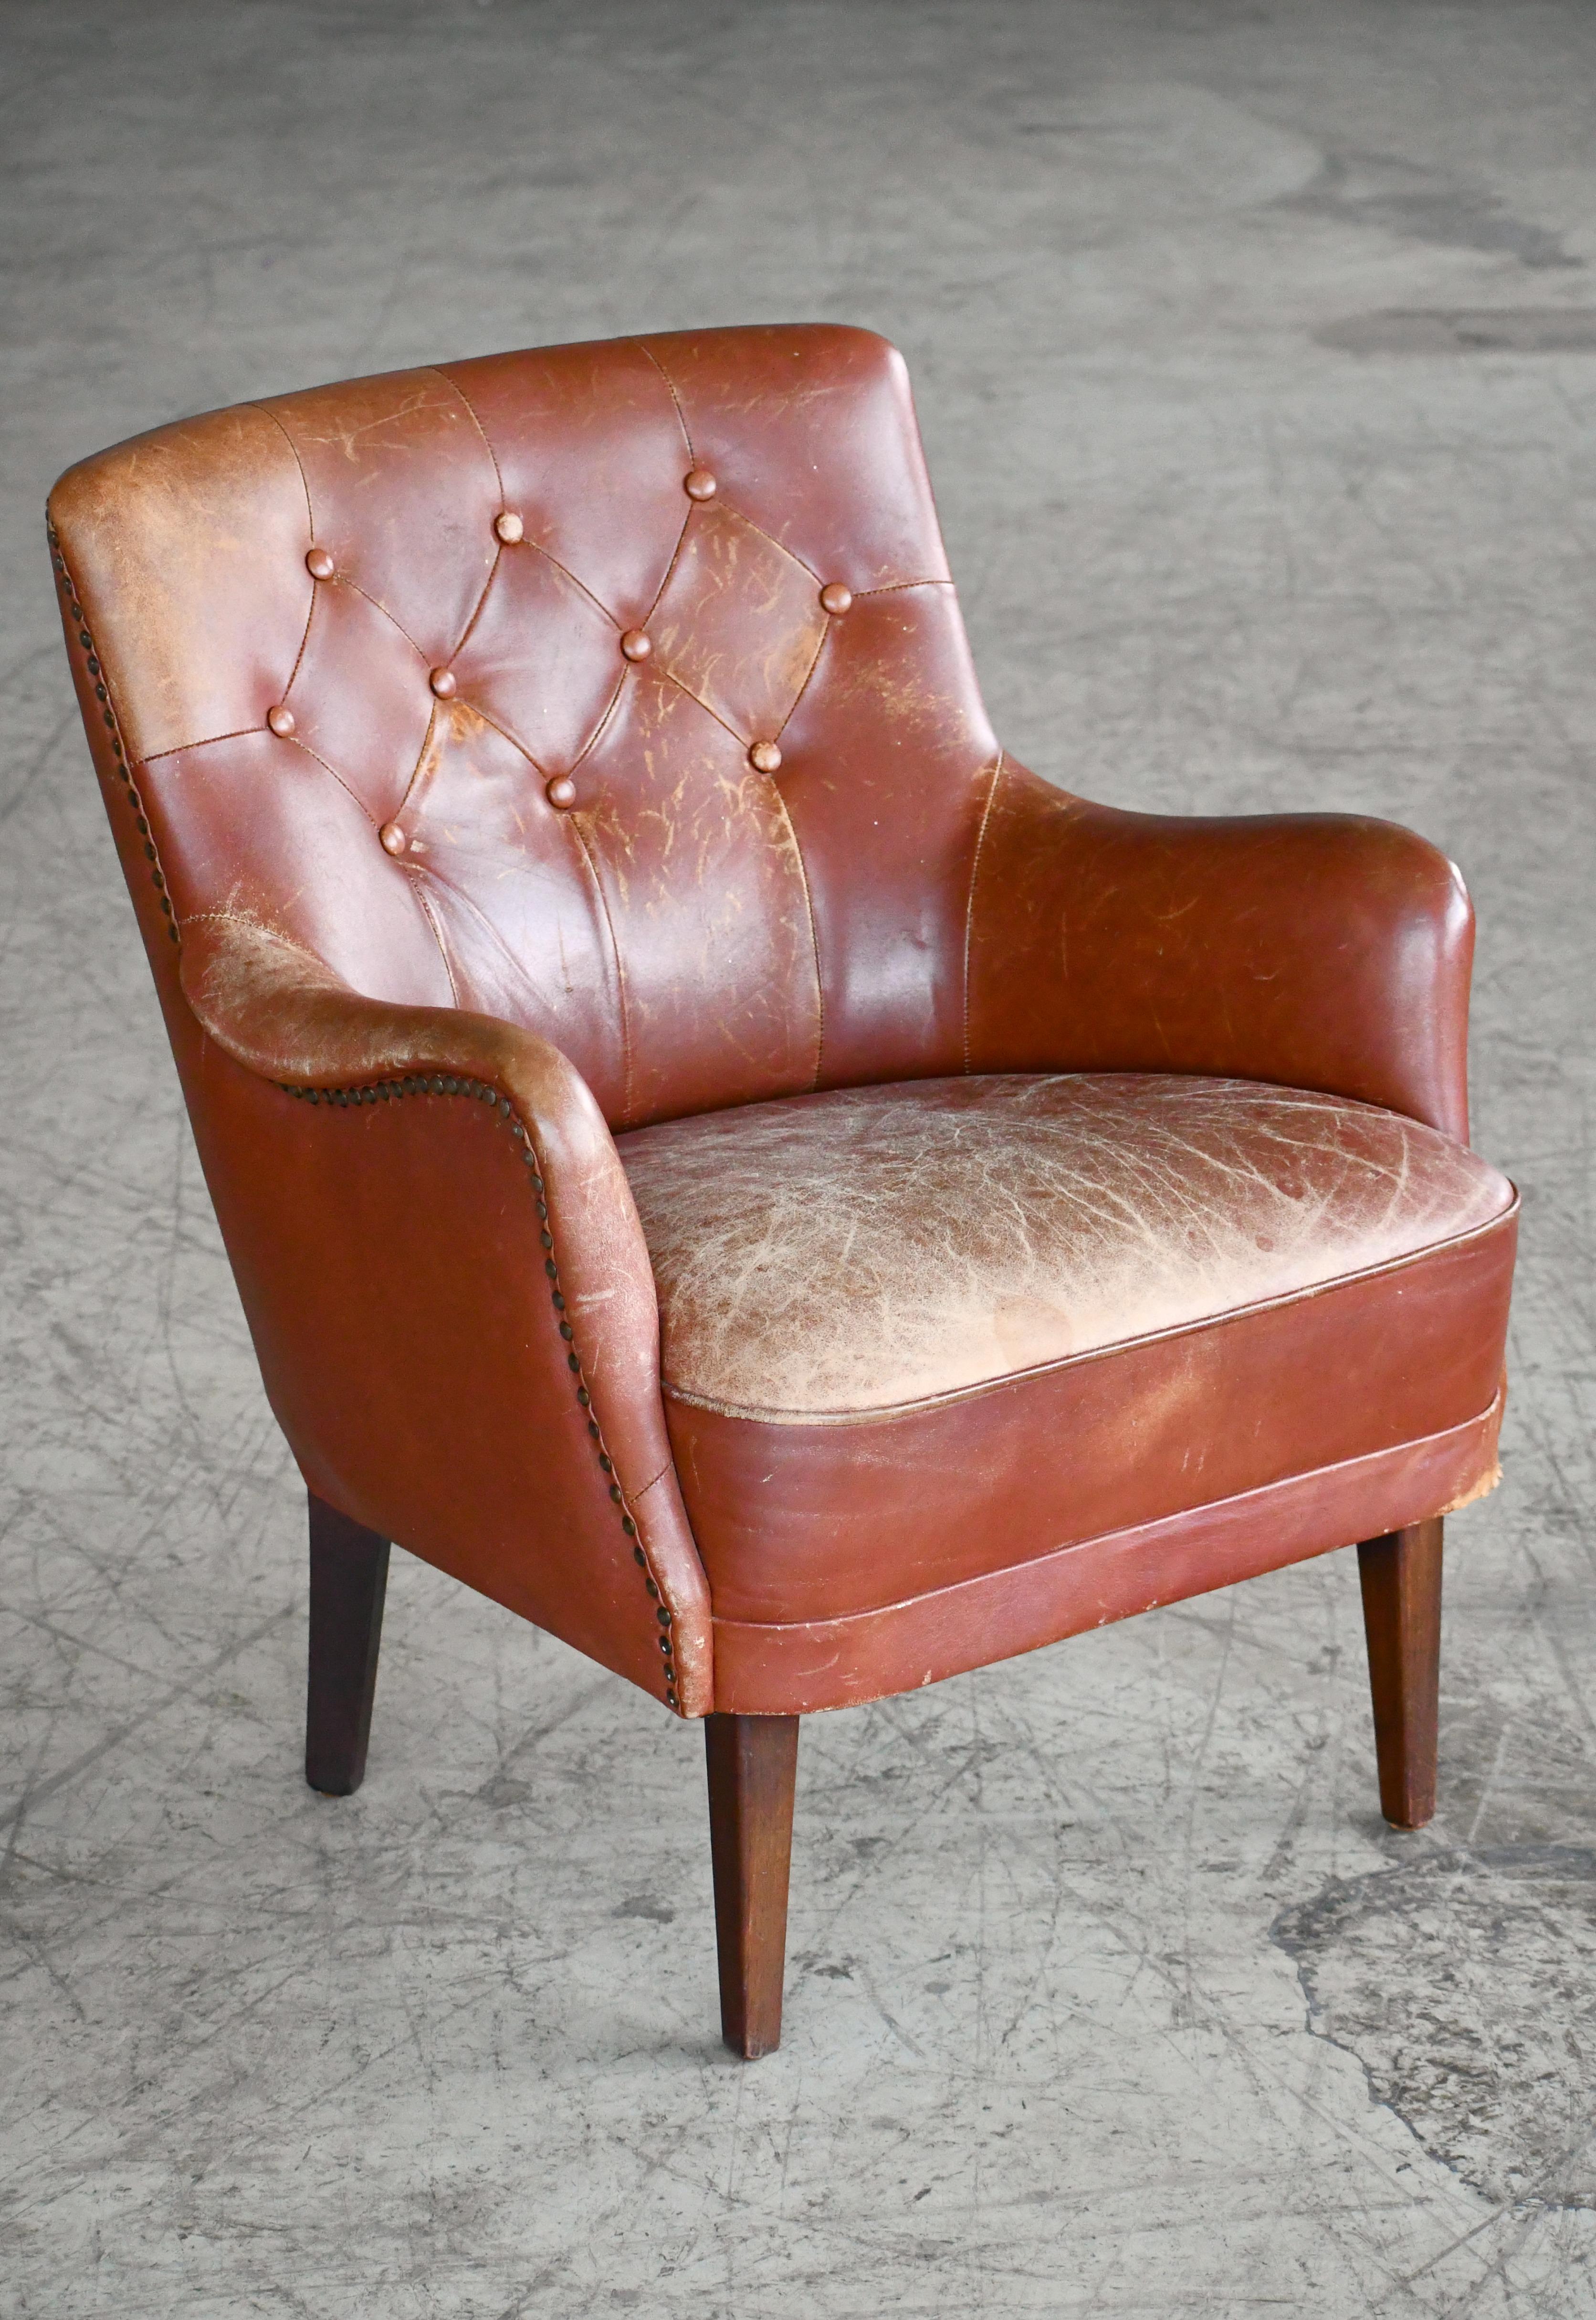 Charming and elegant small Danish easy chair in the style of Frits Henningsen with tufted leather back. Leather is in good condition with a nice patina and some wear on the seat and some scuffs and scrathes on the backrest and some surface wear to